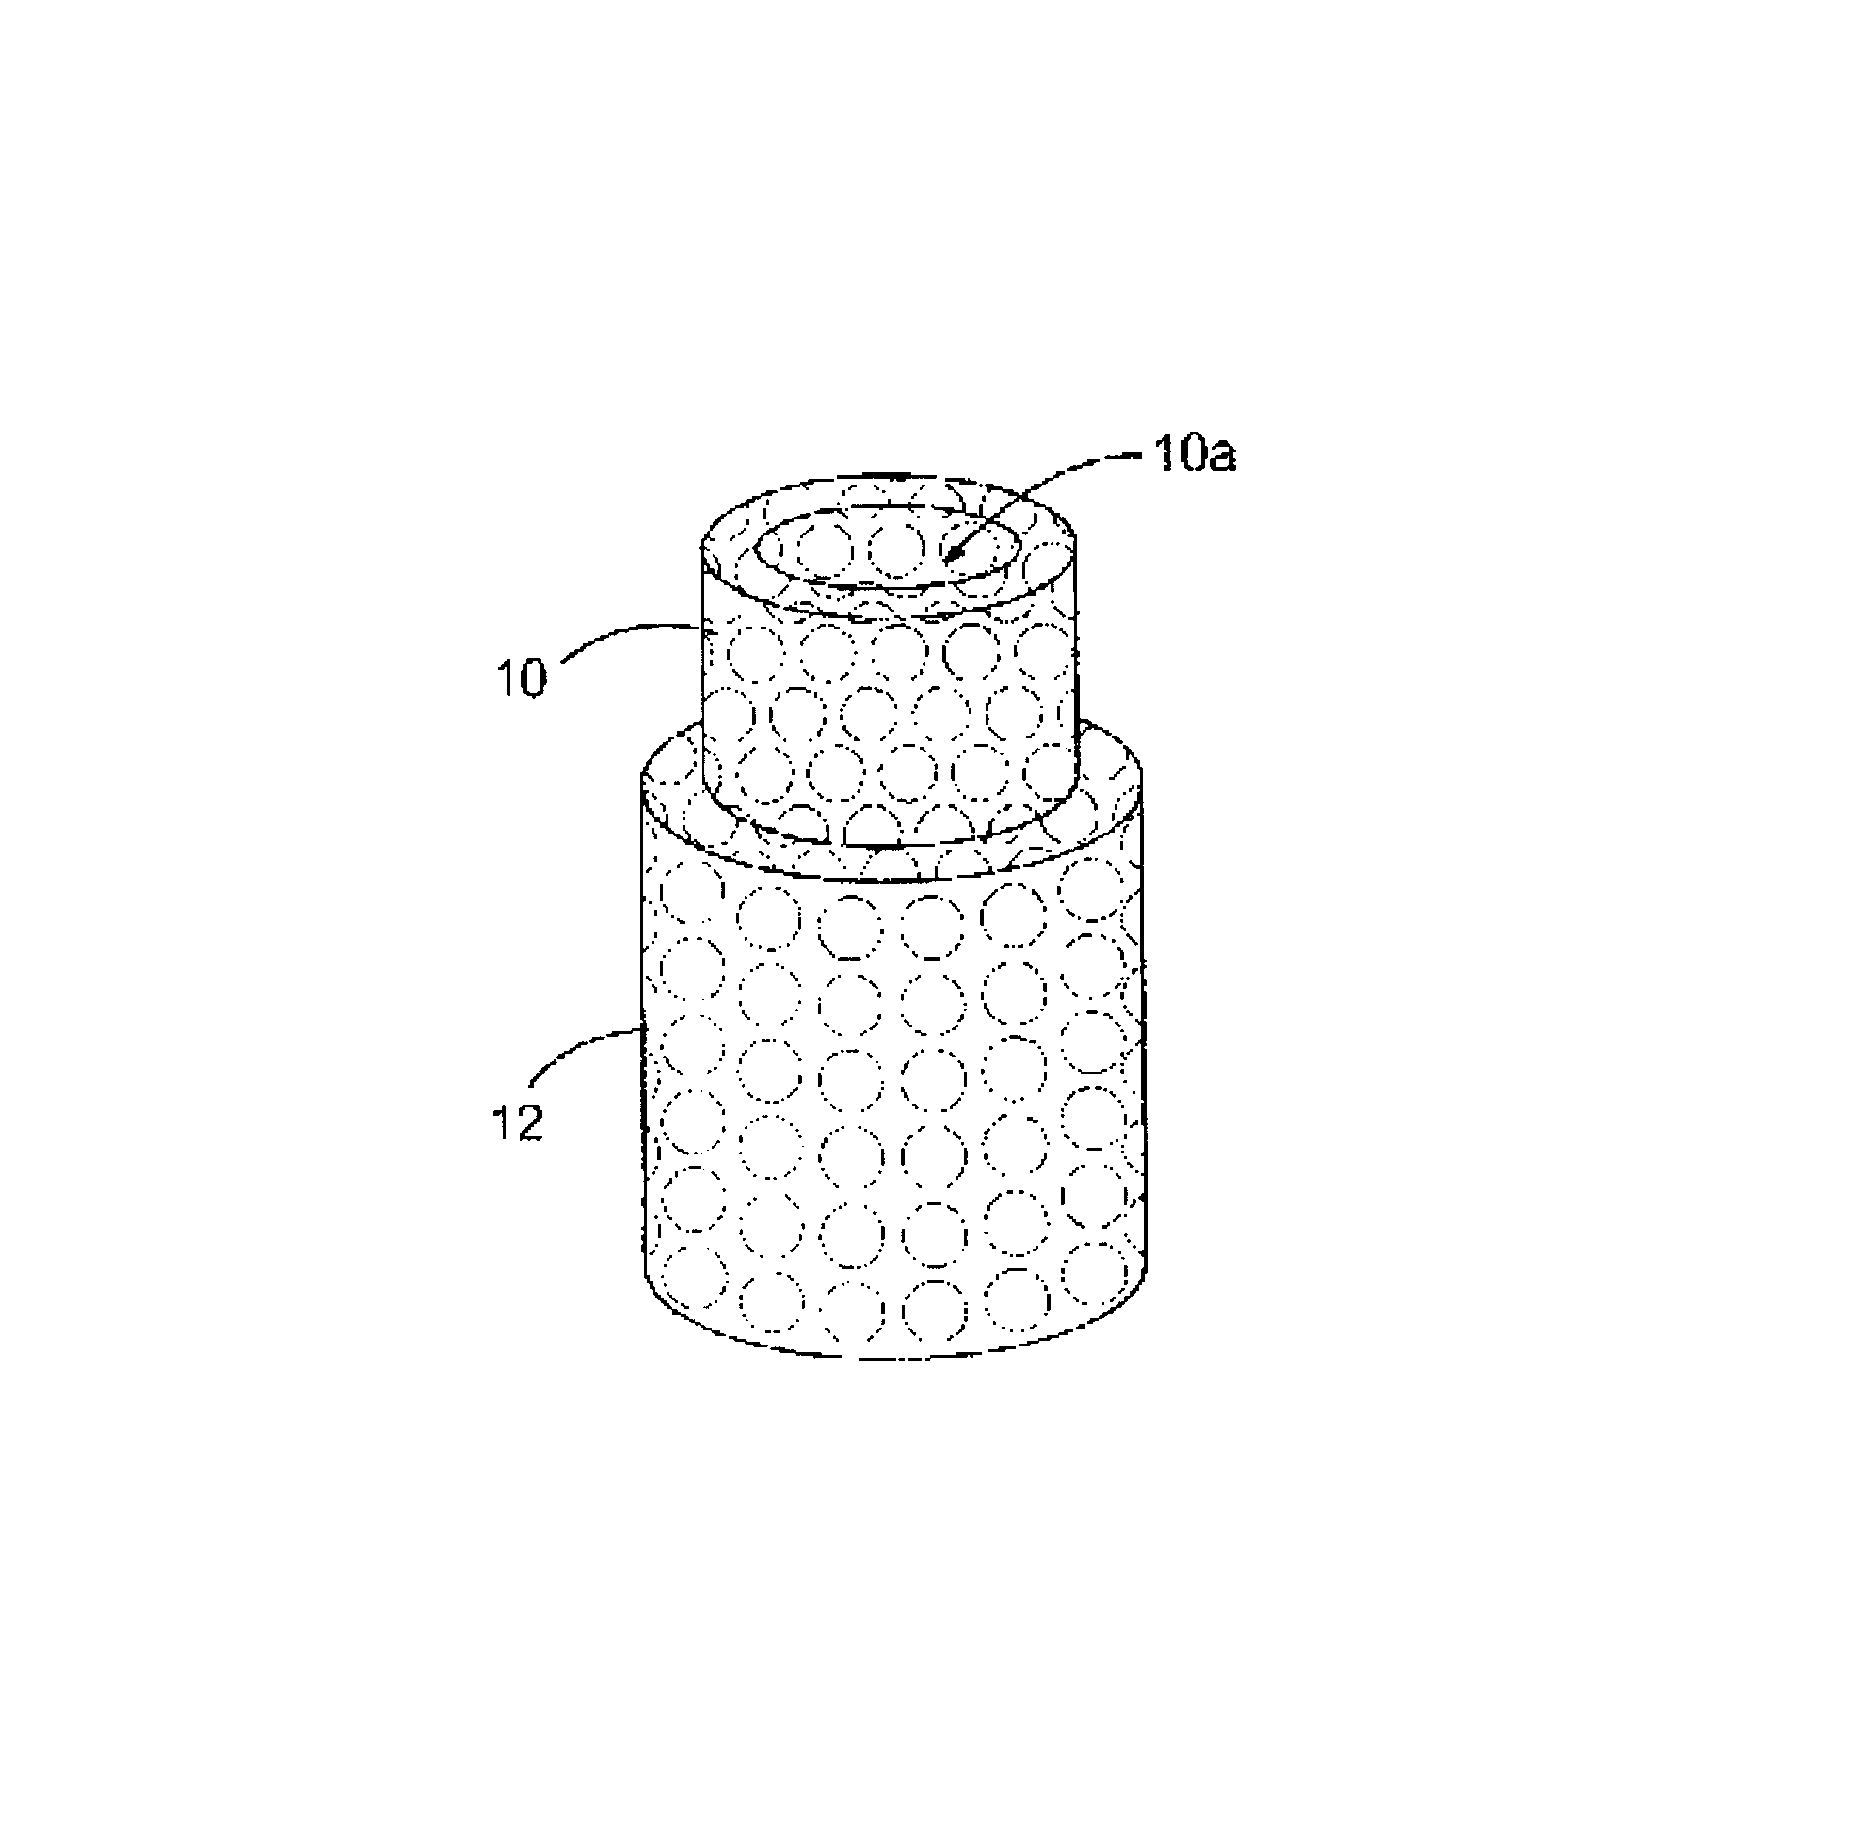 Protective packaging device for blast and fragmentation mitigation